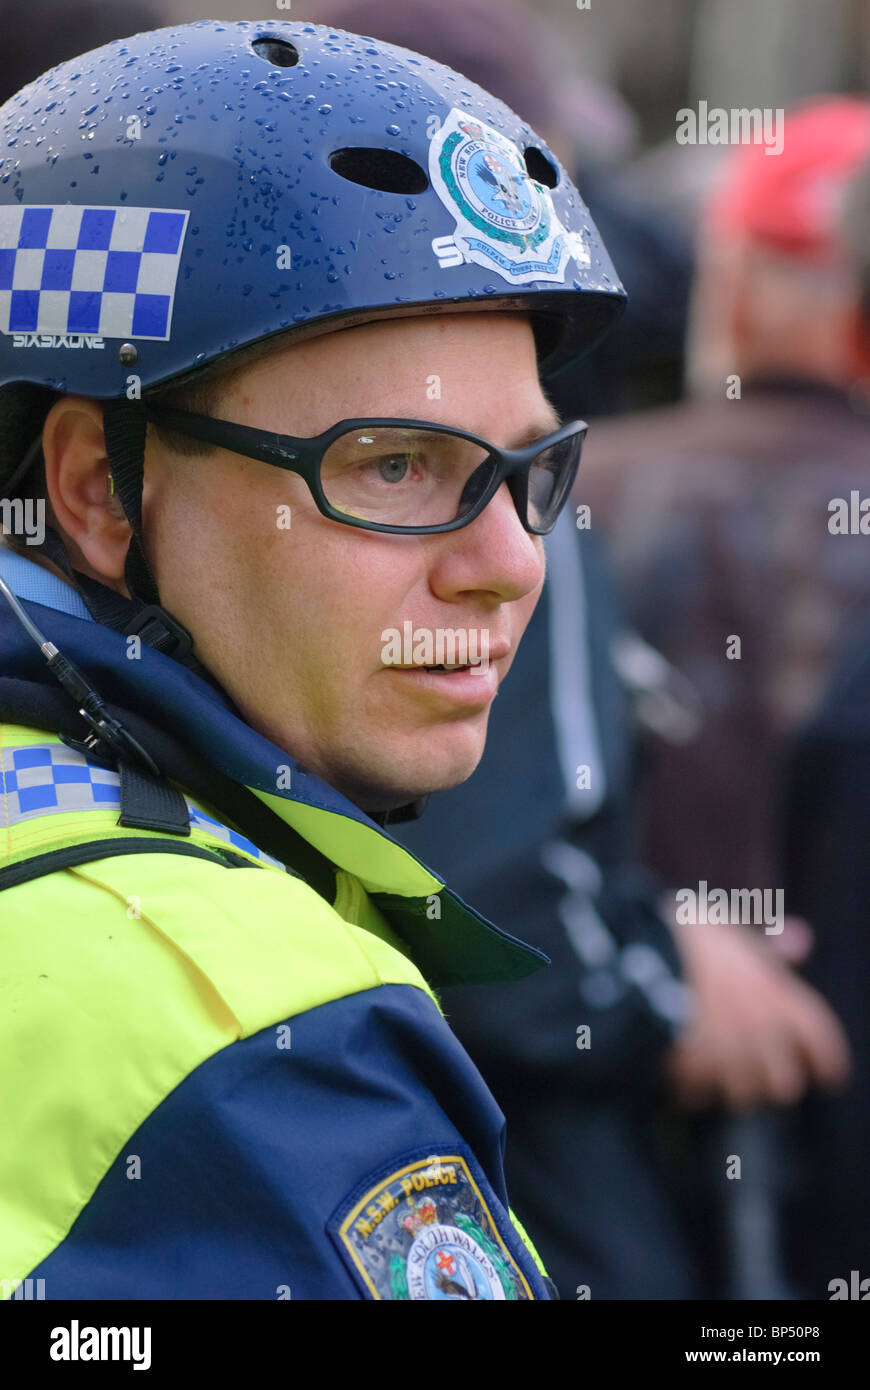 Bicycle policeman watches the crowds during a protest Stock Photo